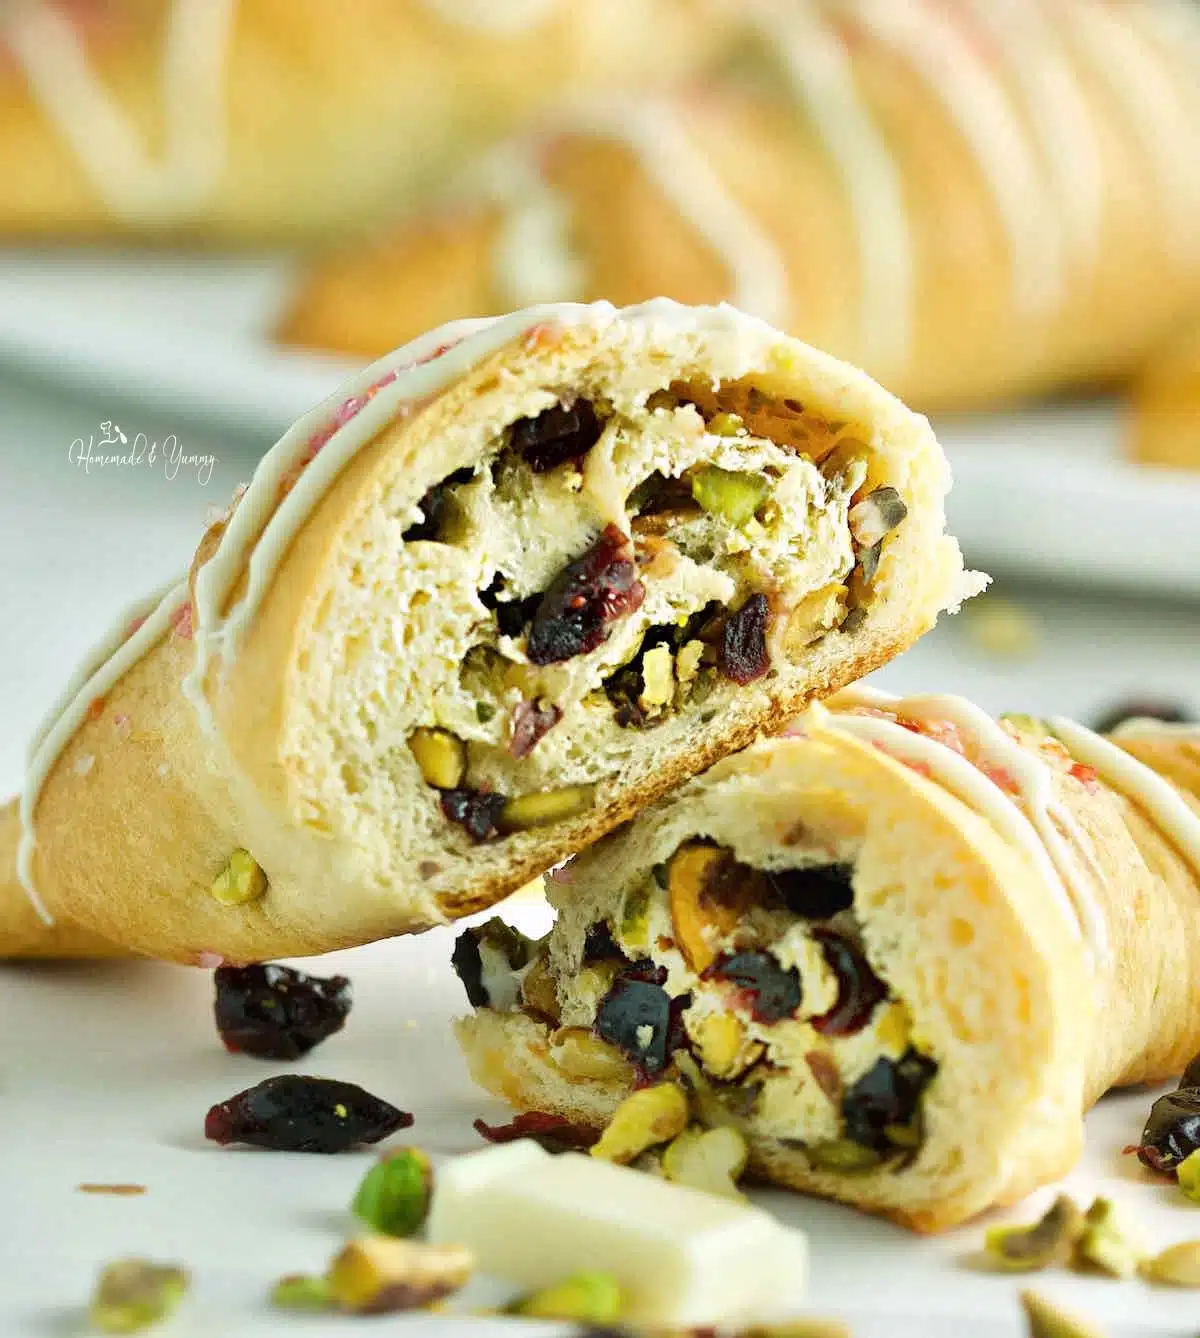 Stuffed Christmas croissants with cranberries and pistachios.